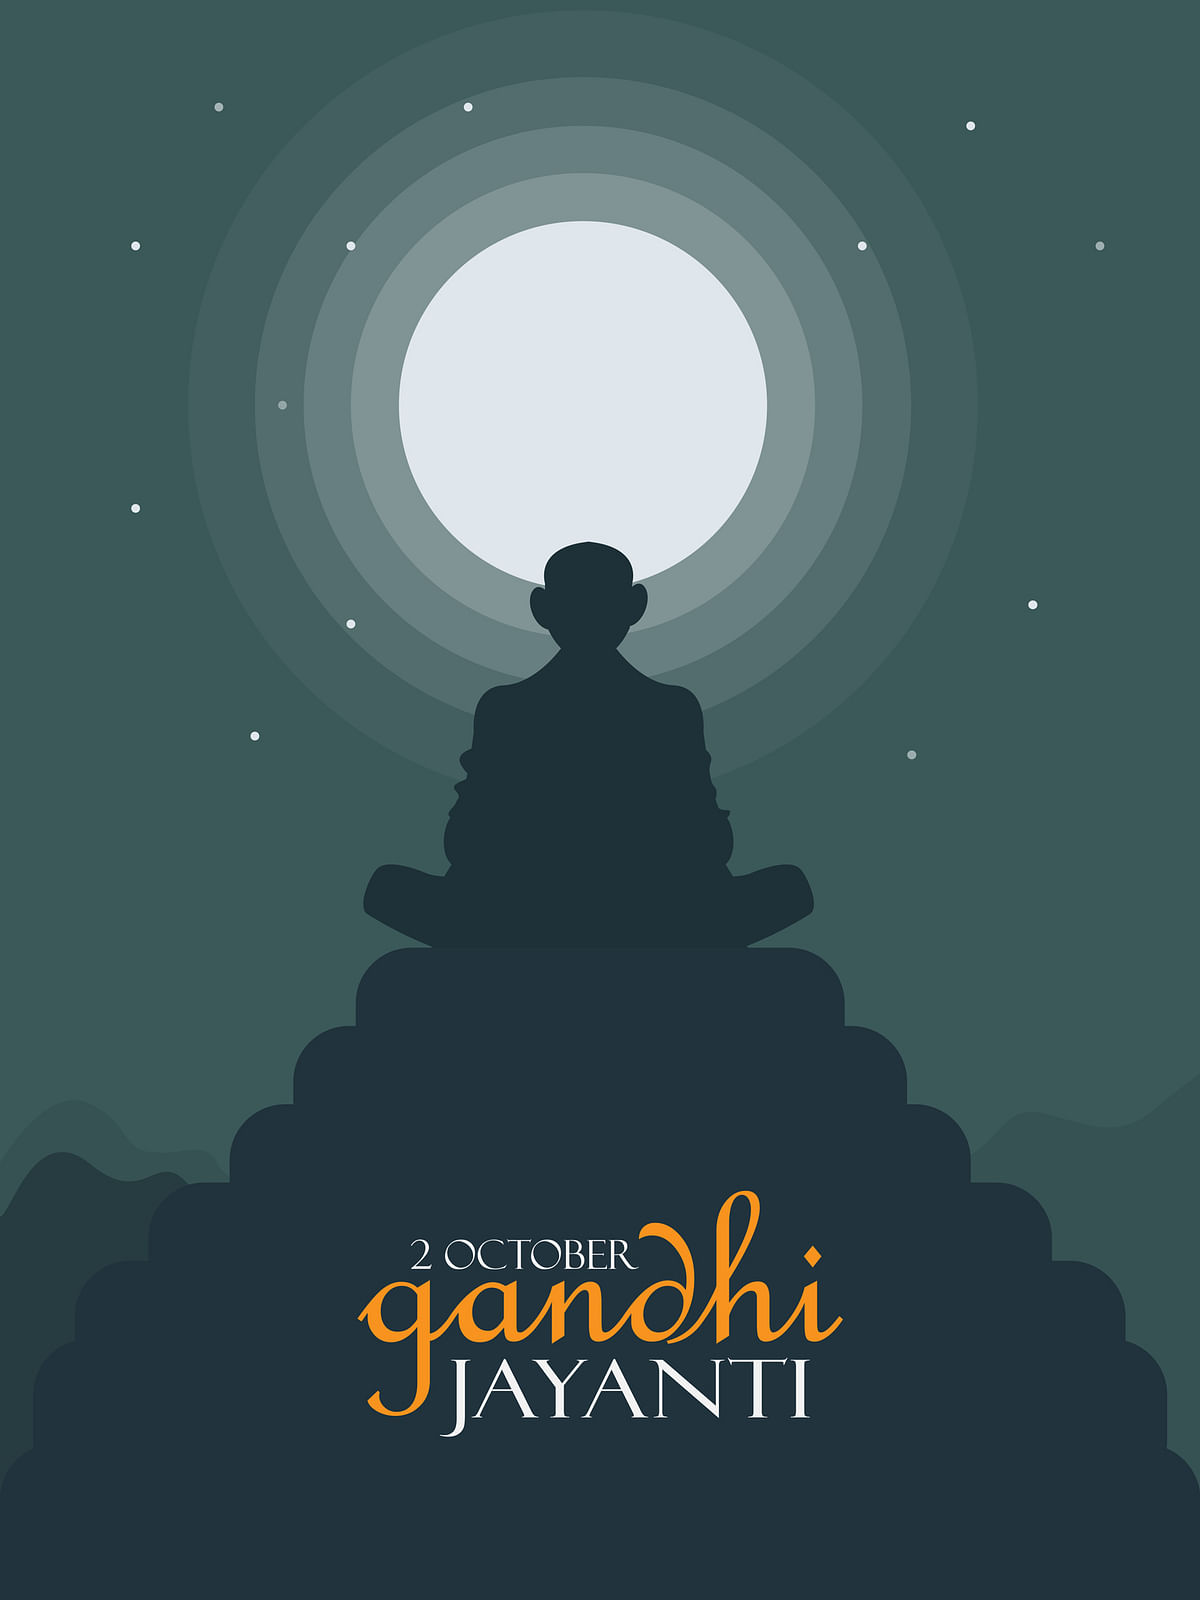 Here are some images, wishes and quotes that you can share with your loved ones on on Gandhi Jayanti.